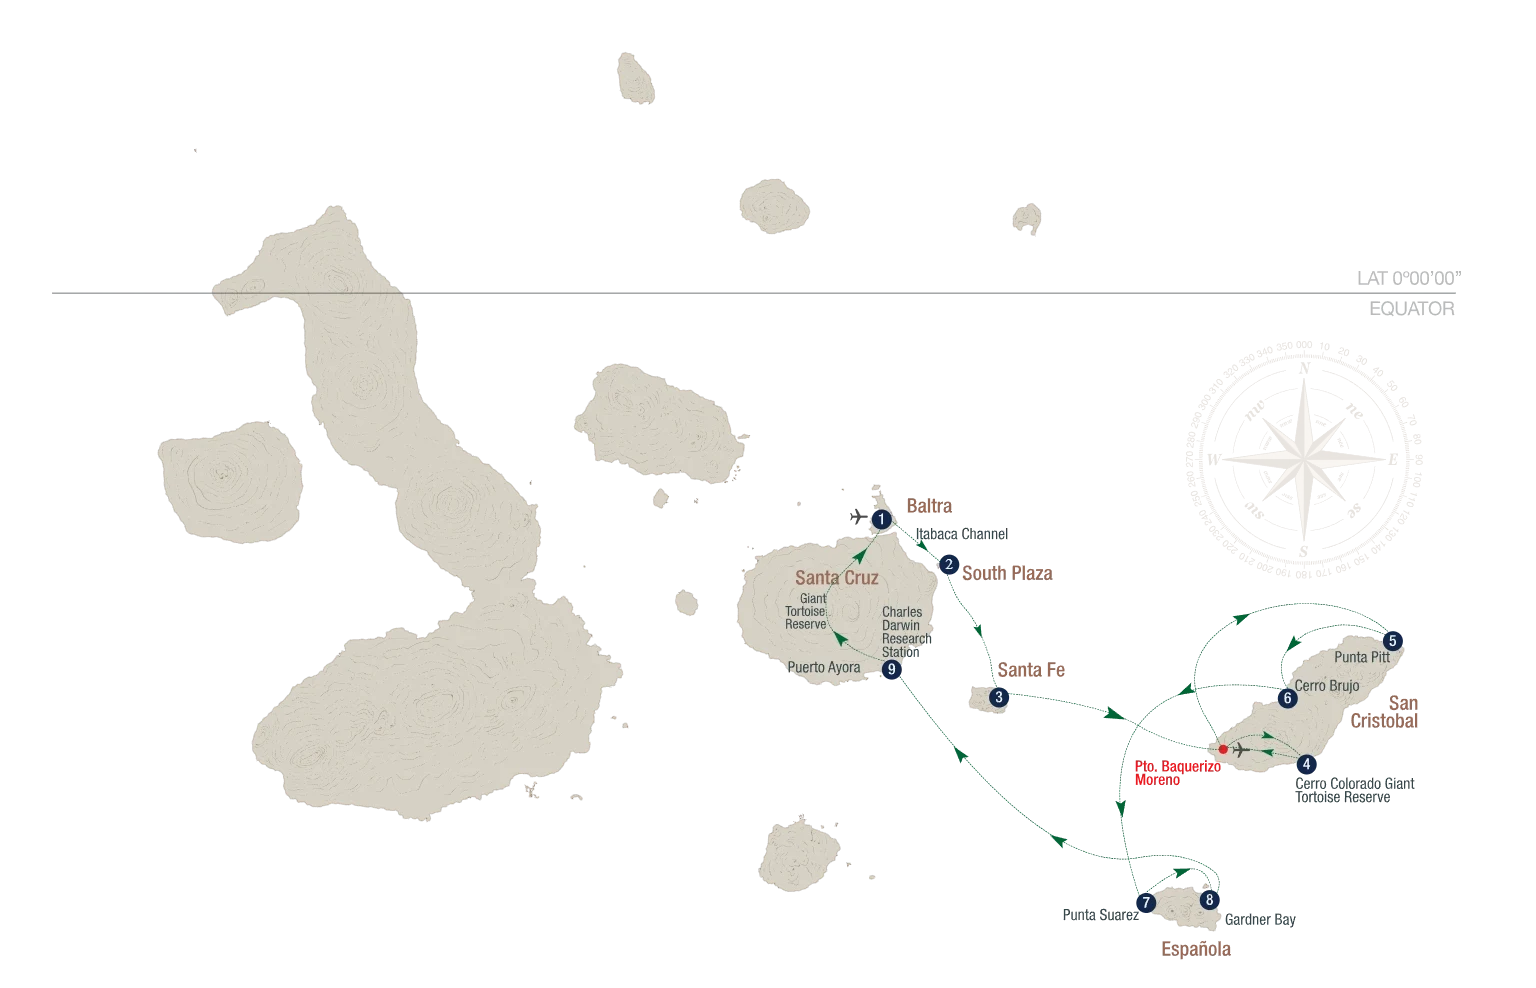 Route map of Yacht La Pinta's eastern itinerary in the Galapagos highlighting key stops.